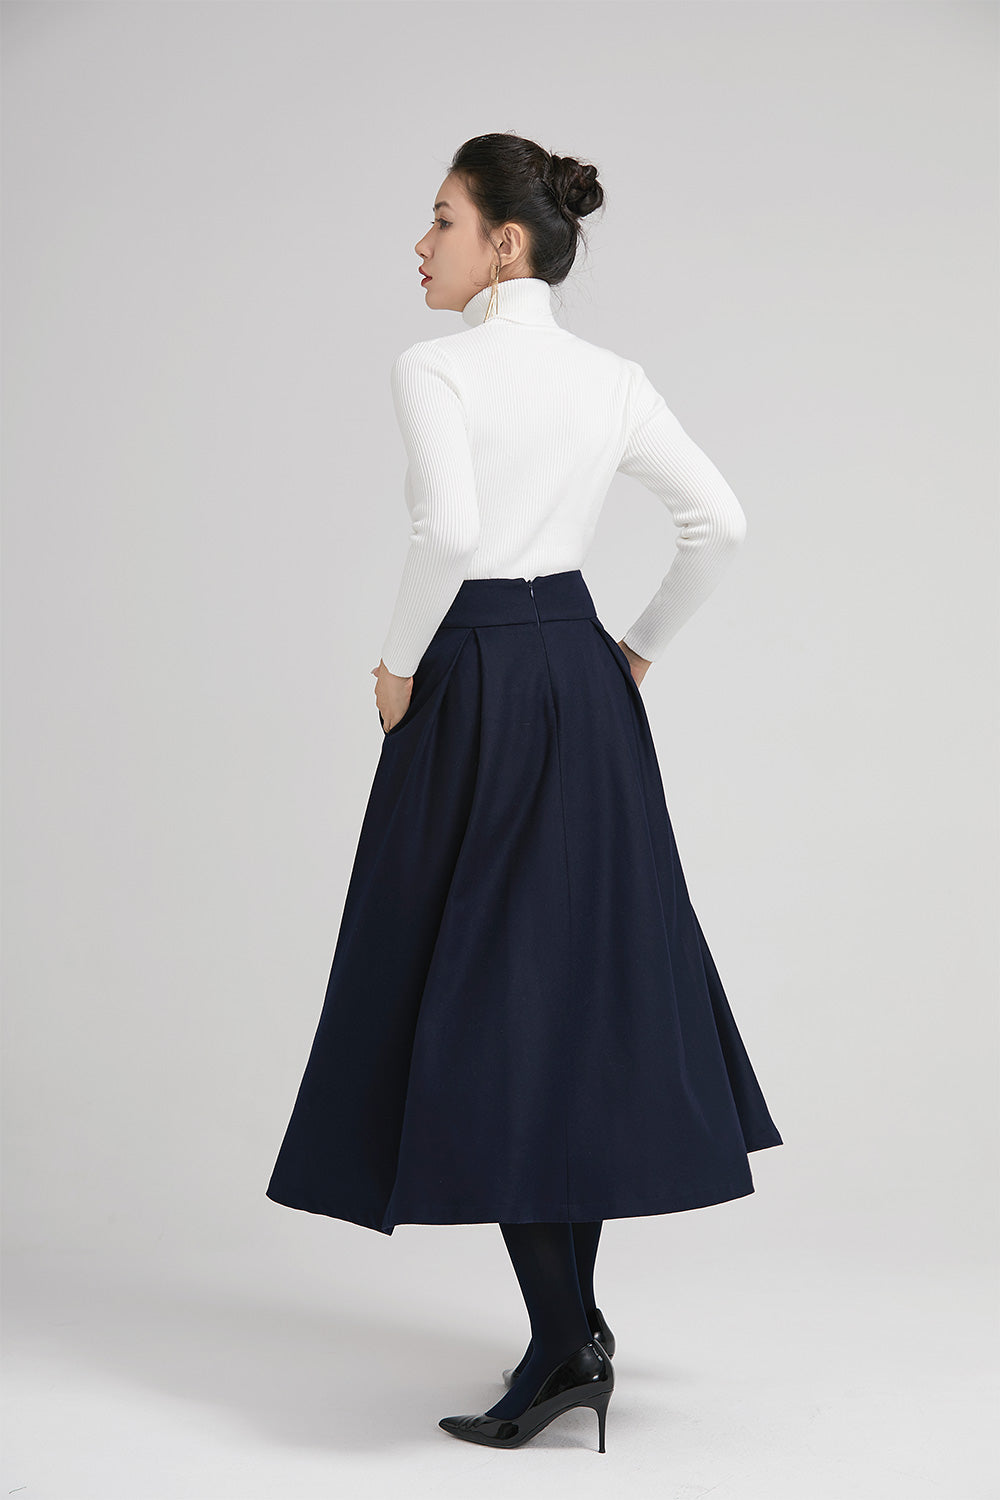 blue wool winter pleated skirt for women with  wide waist band 2245